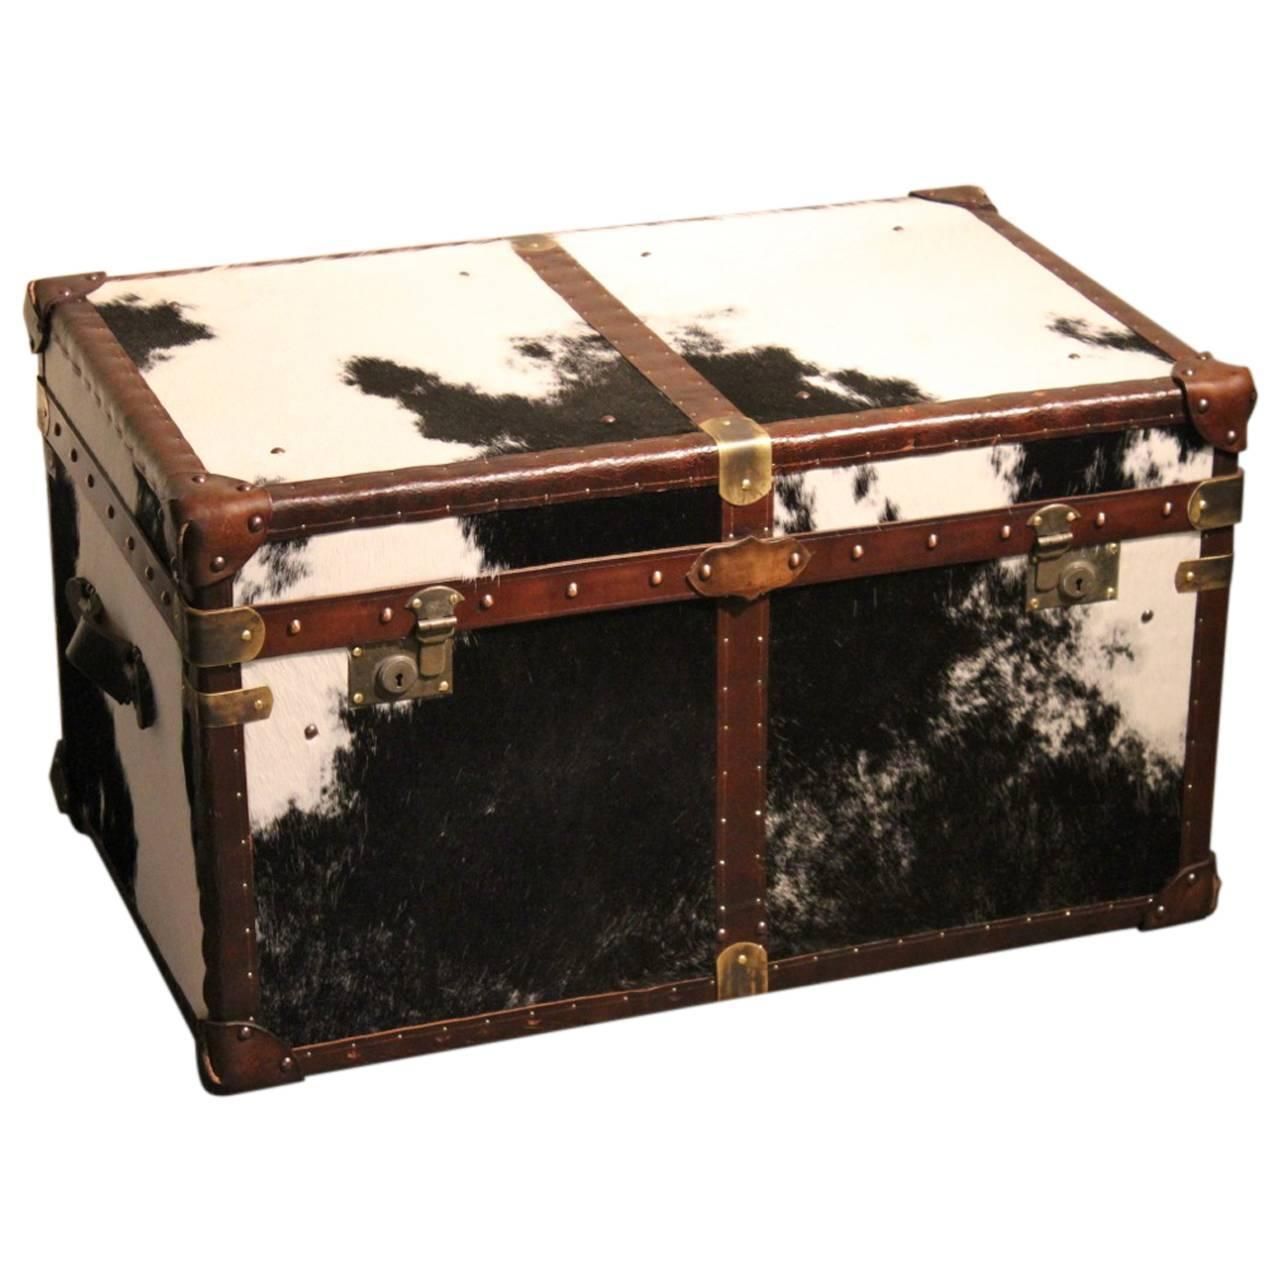 Bespoke Cowhide Trunk / Coffee Table At 1stdibs Regarding Espresso Wood Trunk Cocktail Tables (View 10 of 15)